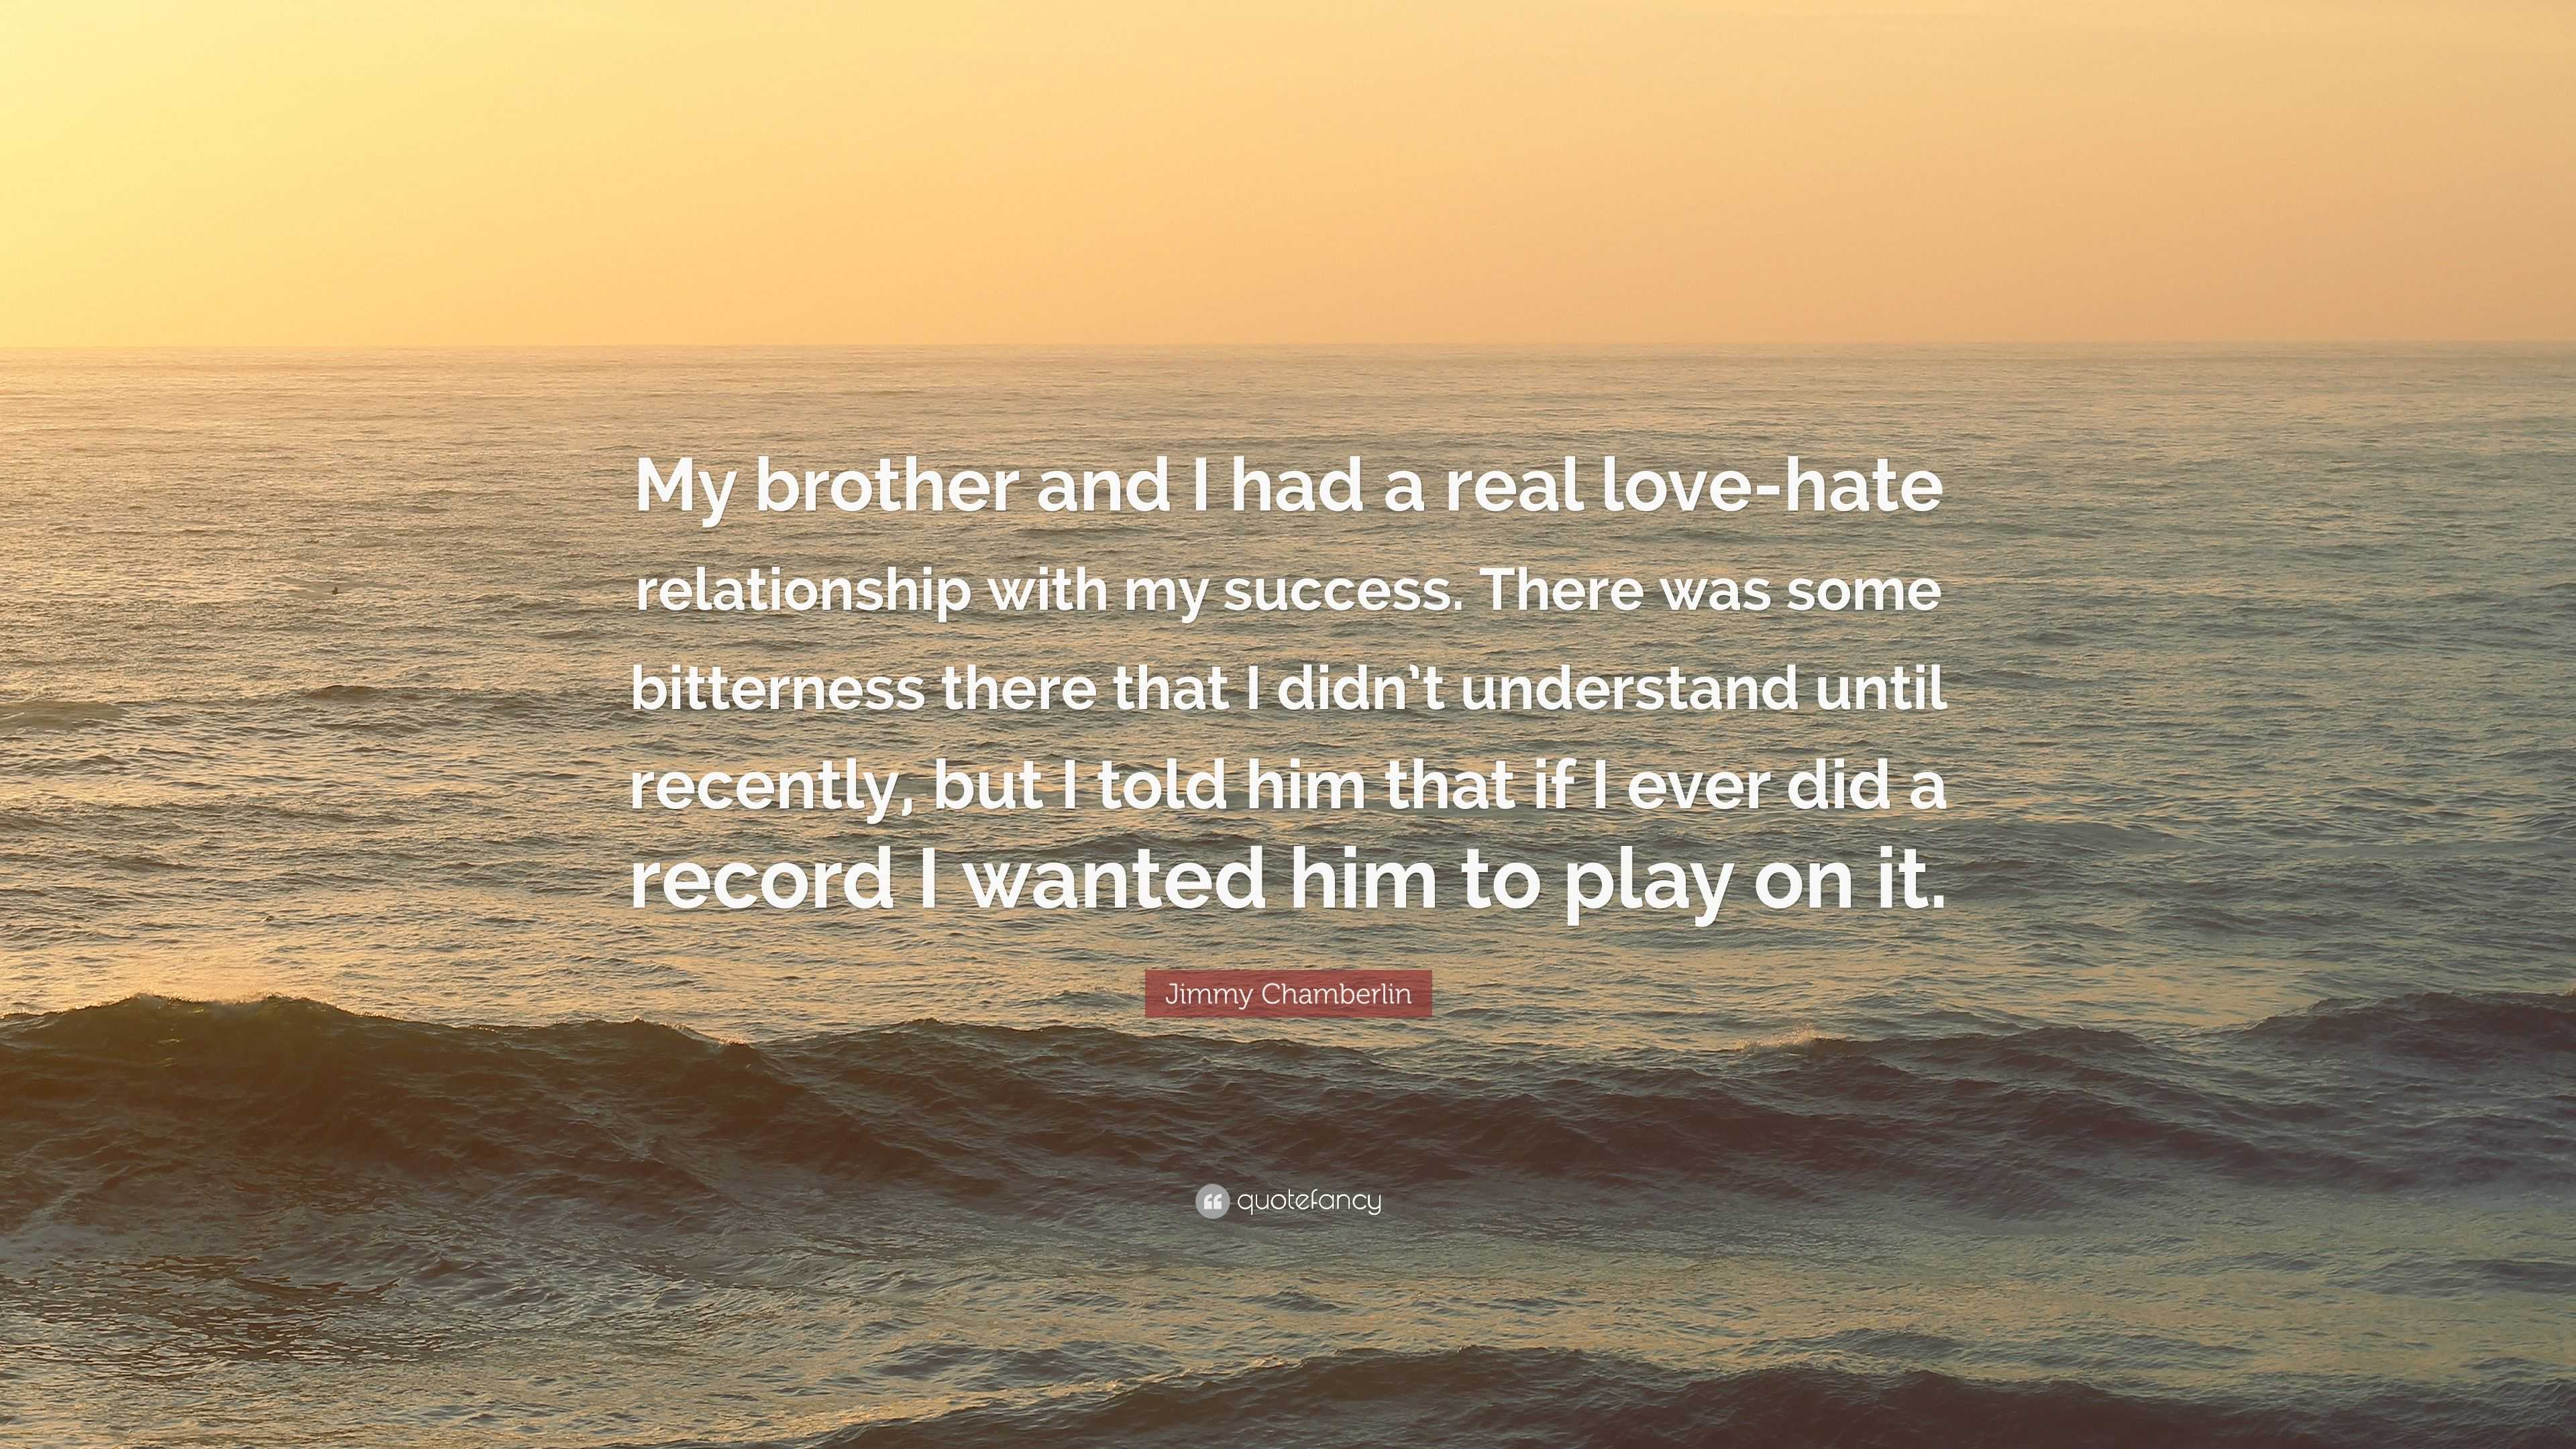 Jimmy Chamberlin Quote “My brother and I had a real love hate relationship